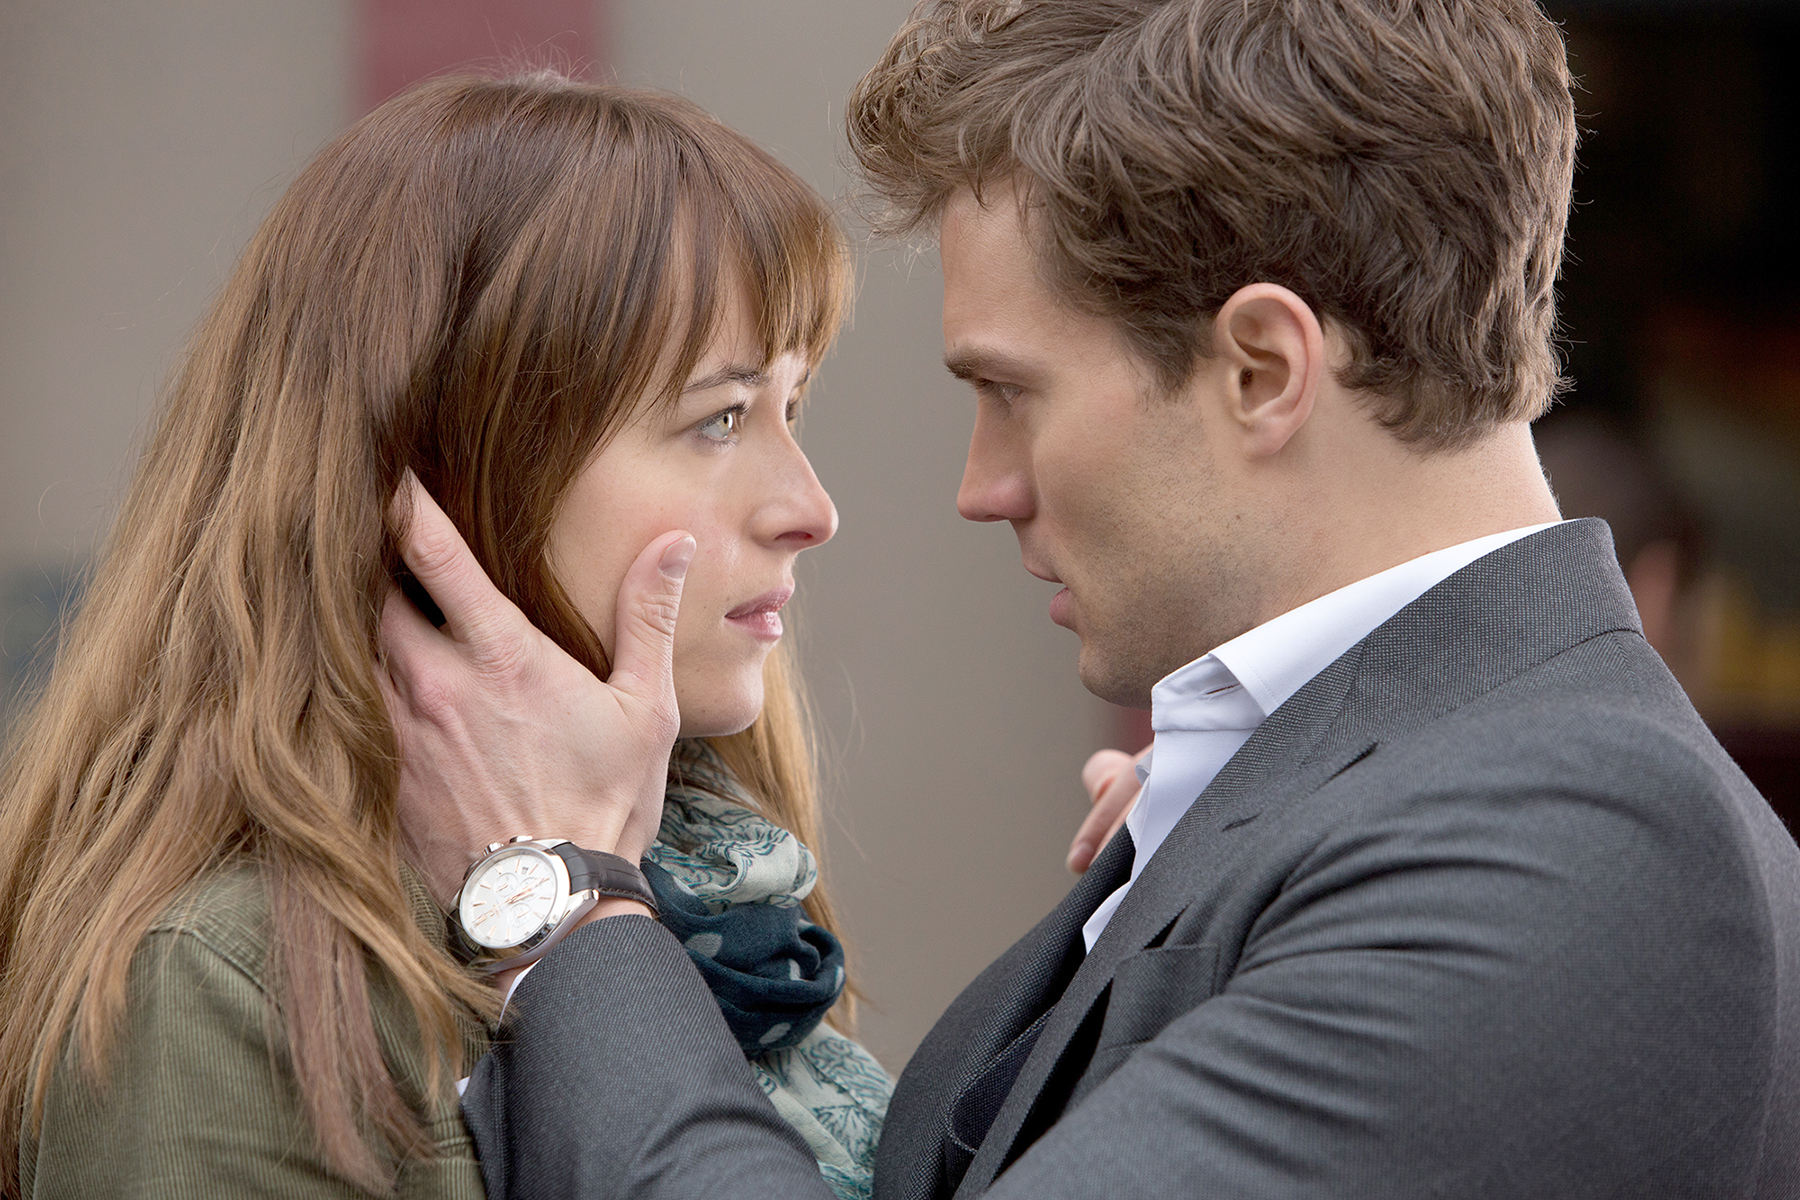 Fifty Shades of Grey' ties up box-office win